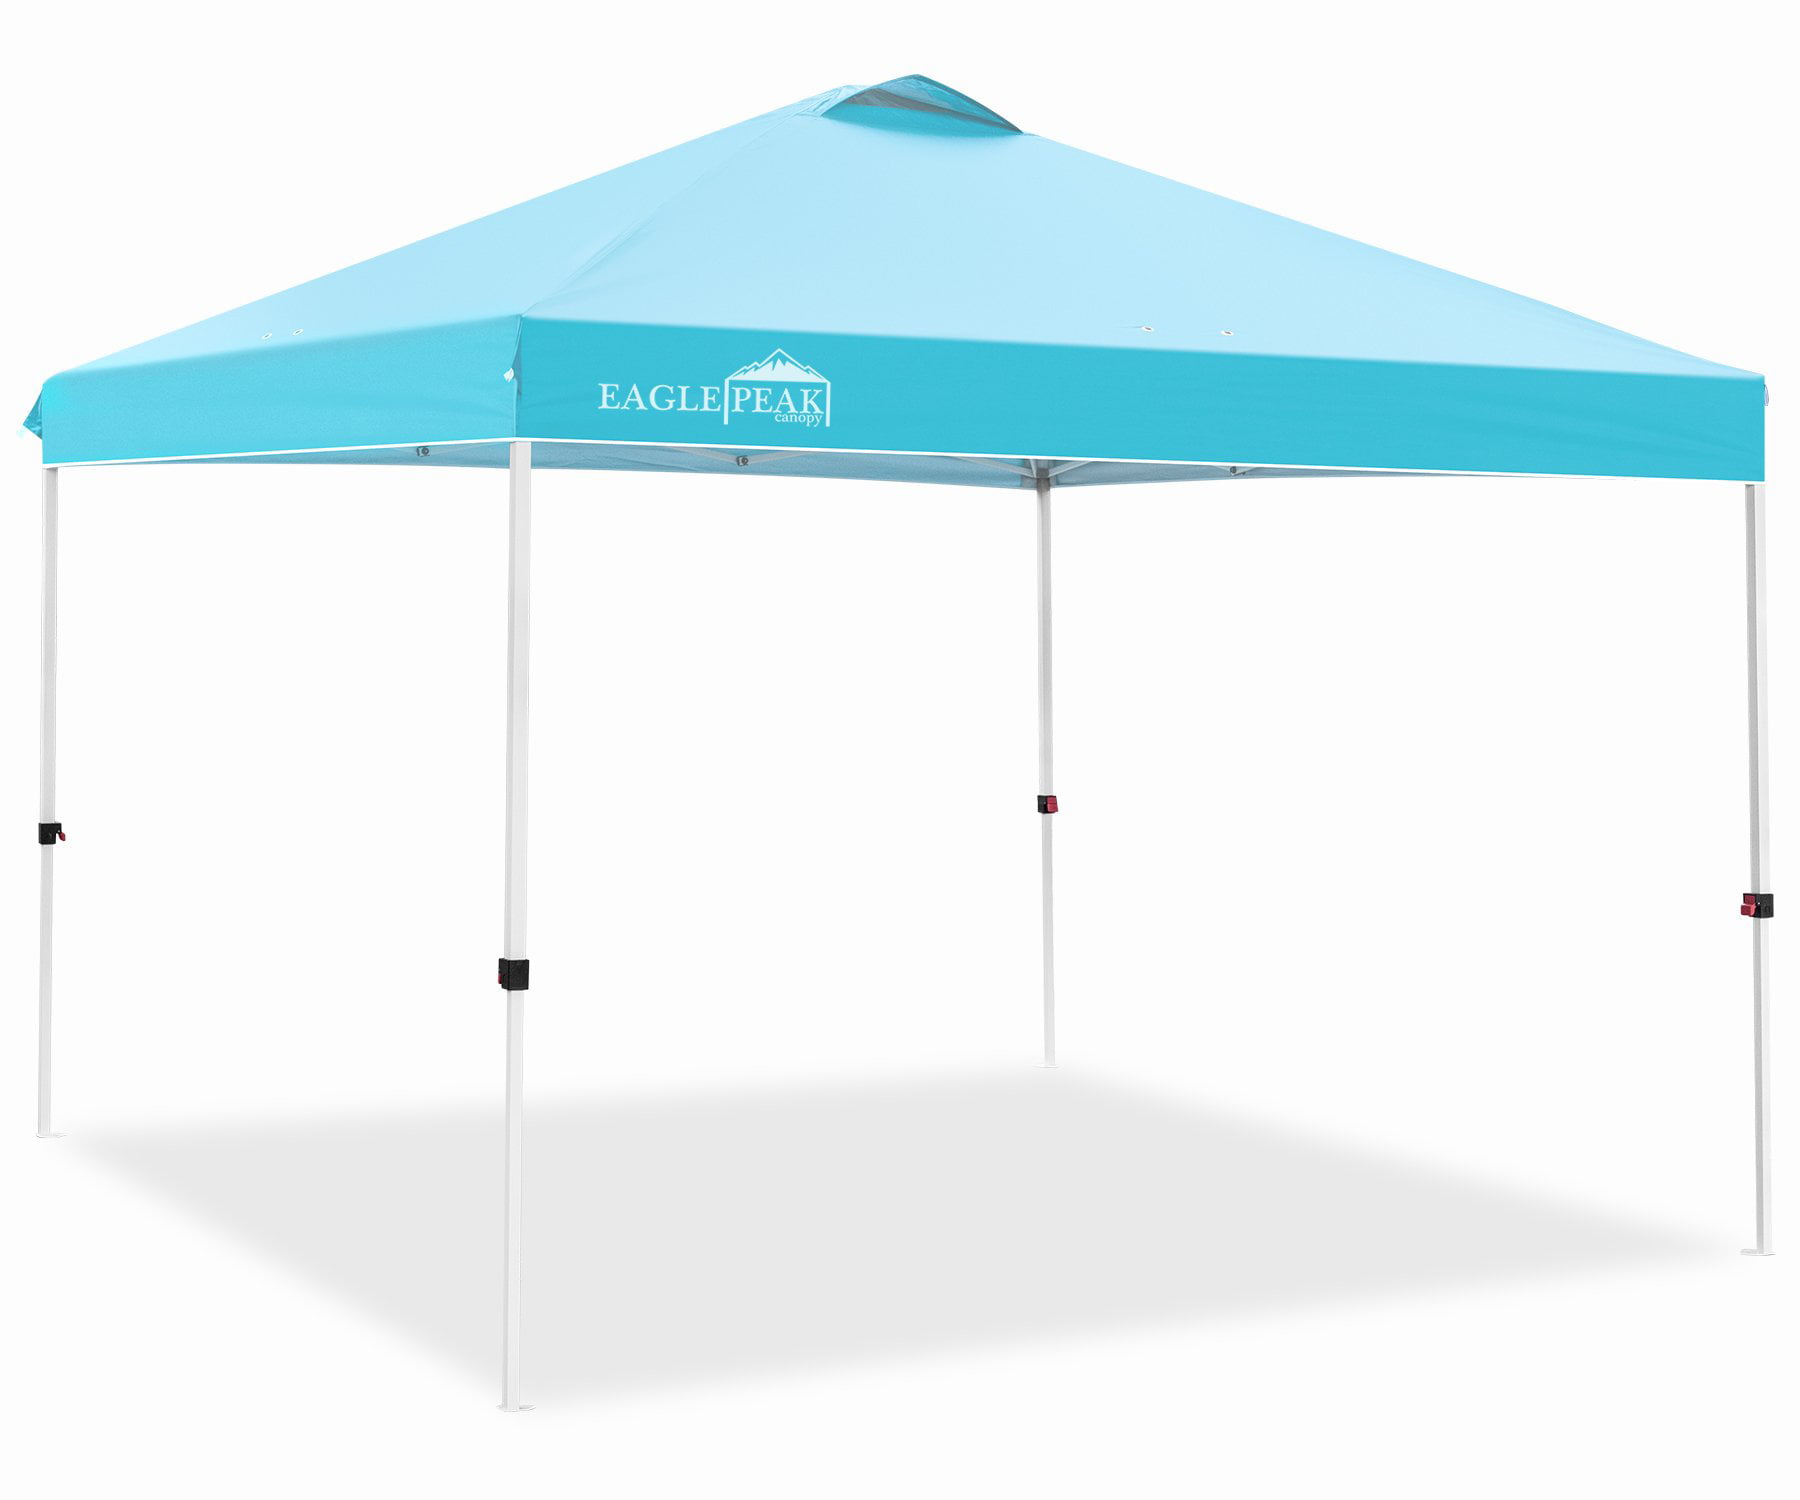 Texas Flag EAGLE PEAK 10 x 10 Slant Leg Pop-up Canopy Tent Easy One Person Setup Instant Outdoor Canopy Folding Shelter with 64 Square Feet of Shade 